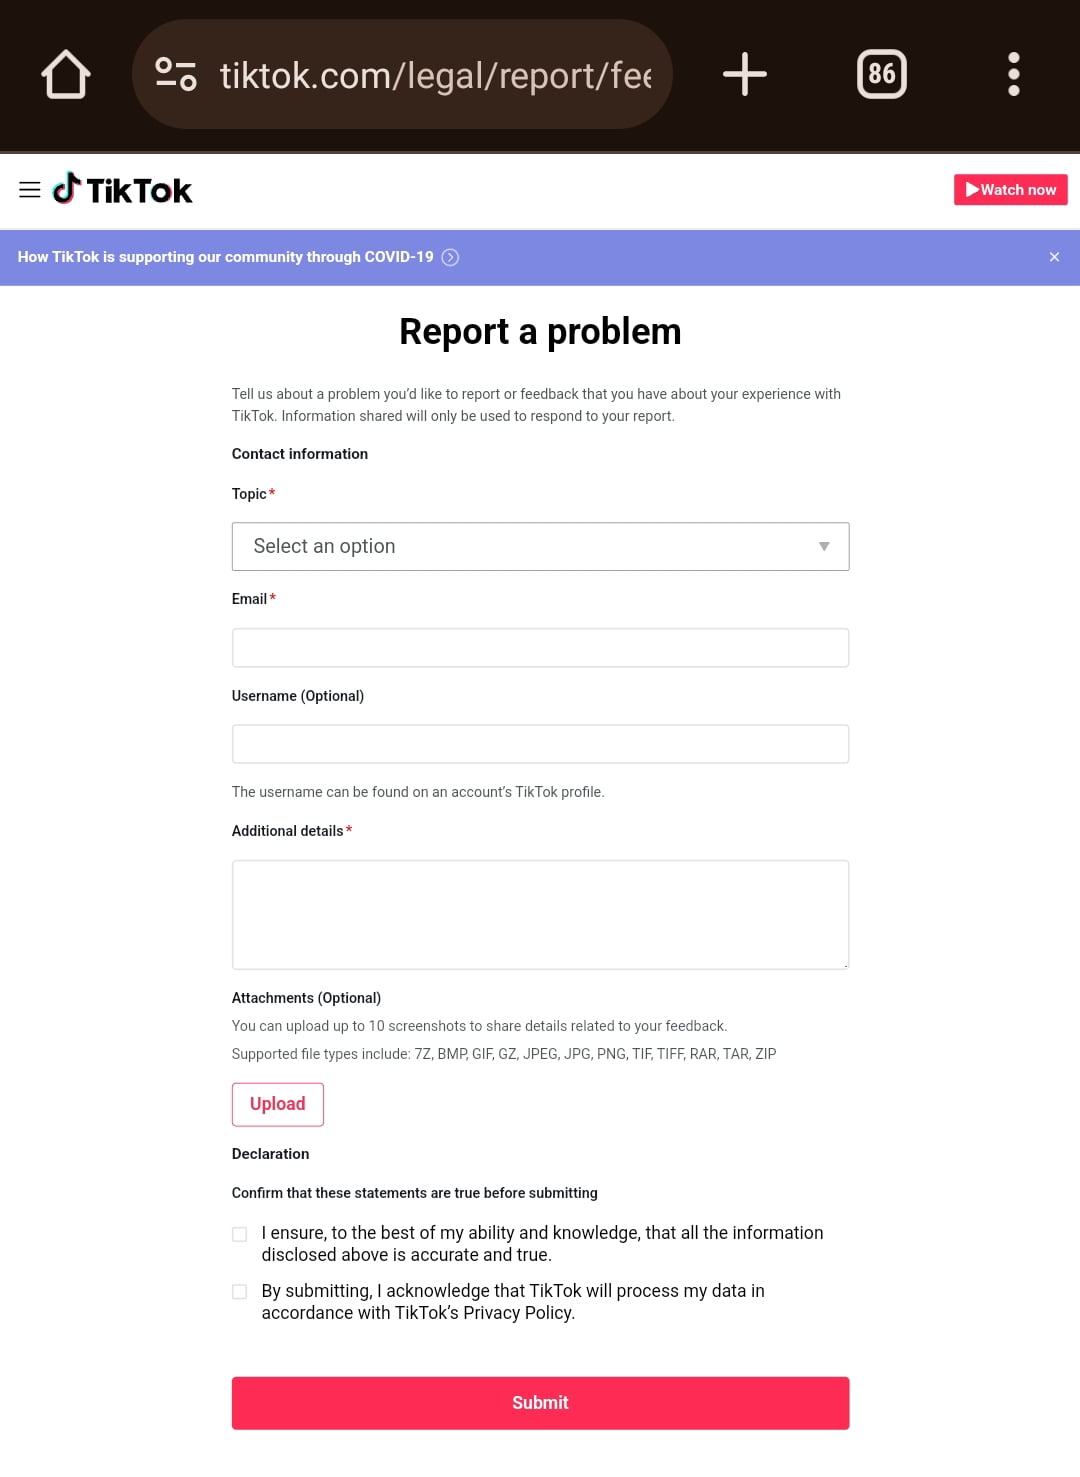 How To Contact Tiktok Support Using The Feedback Form